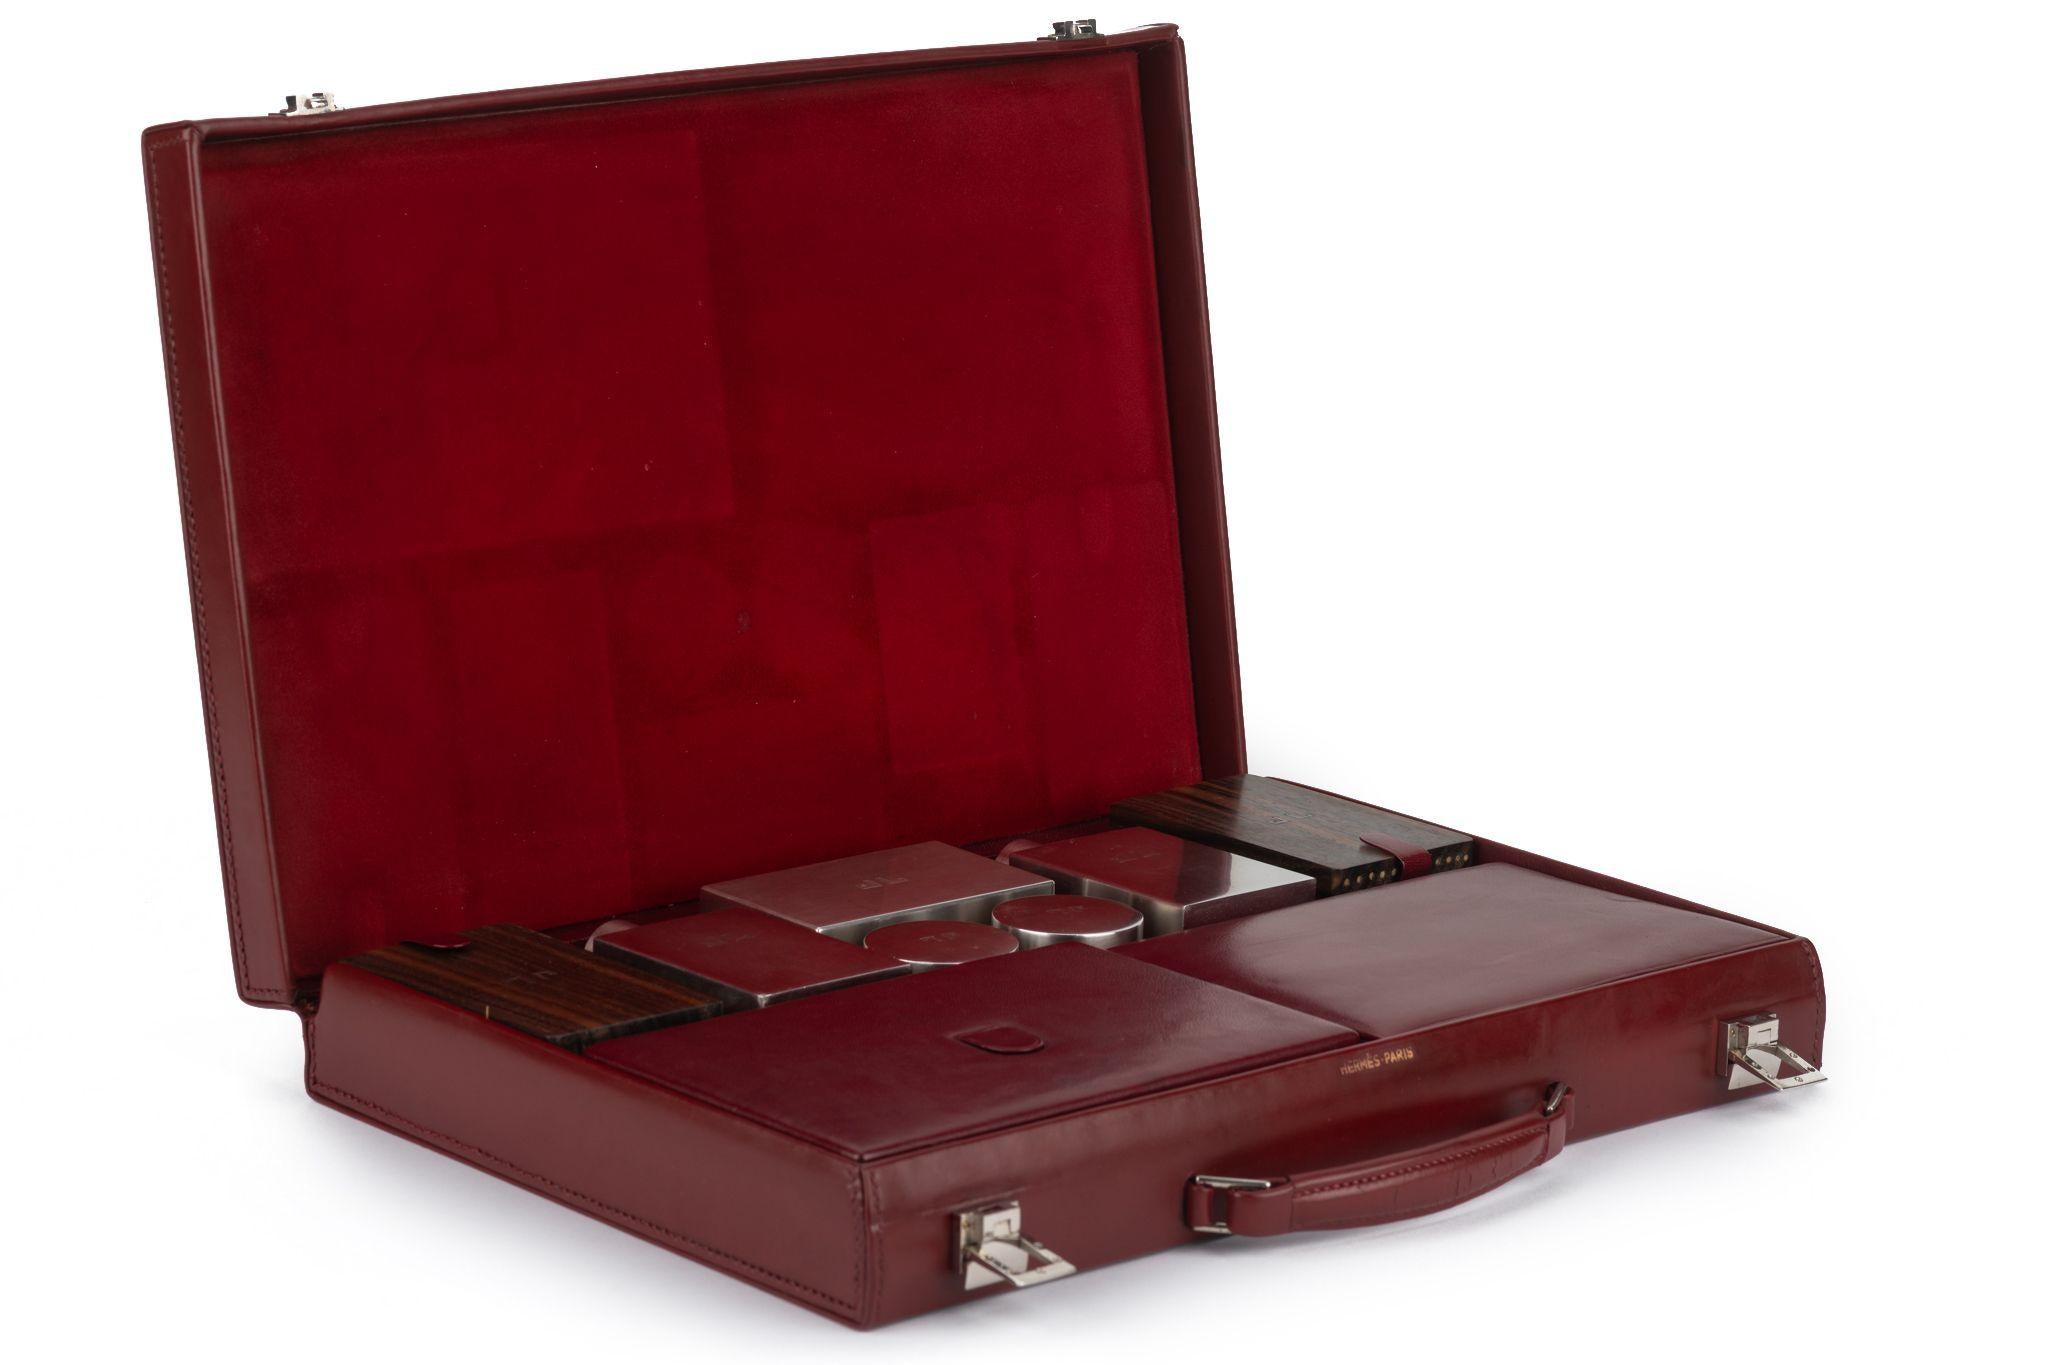 Hermes 1960’s rare and collectible men toiletry case. Rouge H box calf leather and palladium hardware. Excellent condition with all interior parts in place. JJ initials on the outer top have been removed, still present inside.